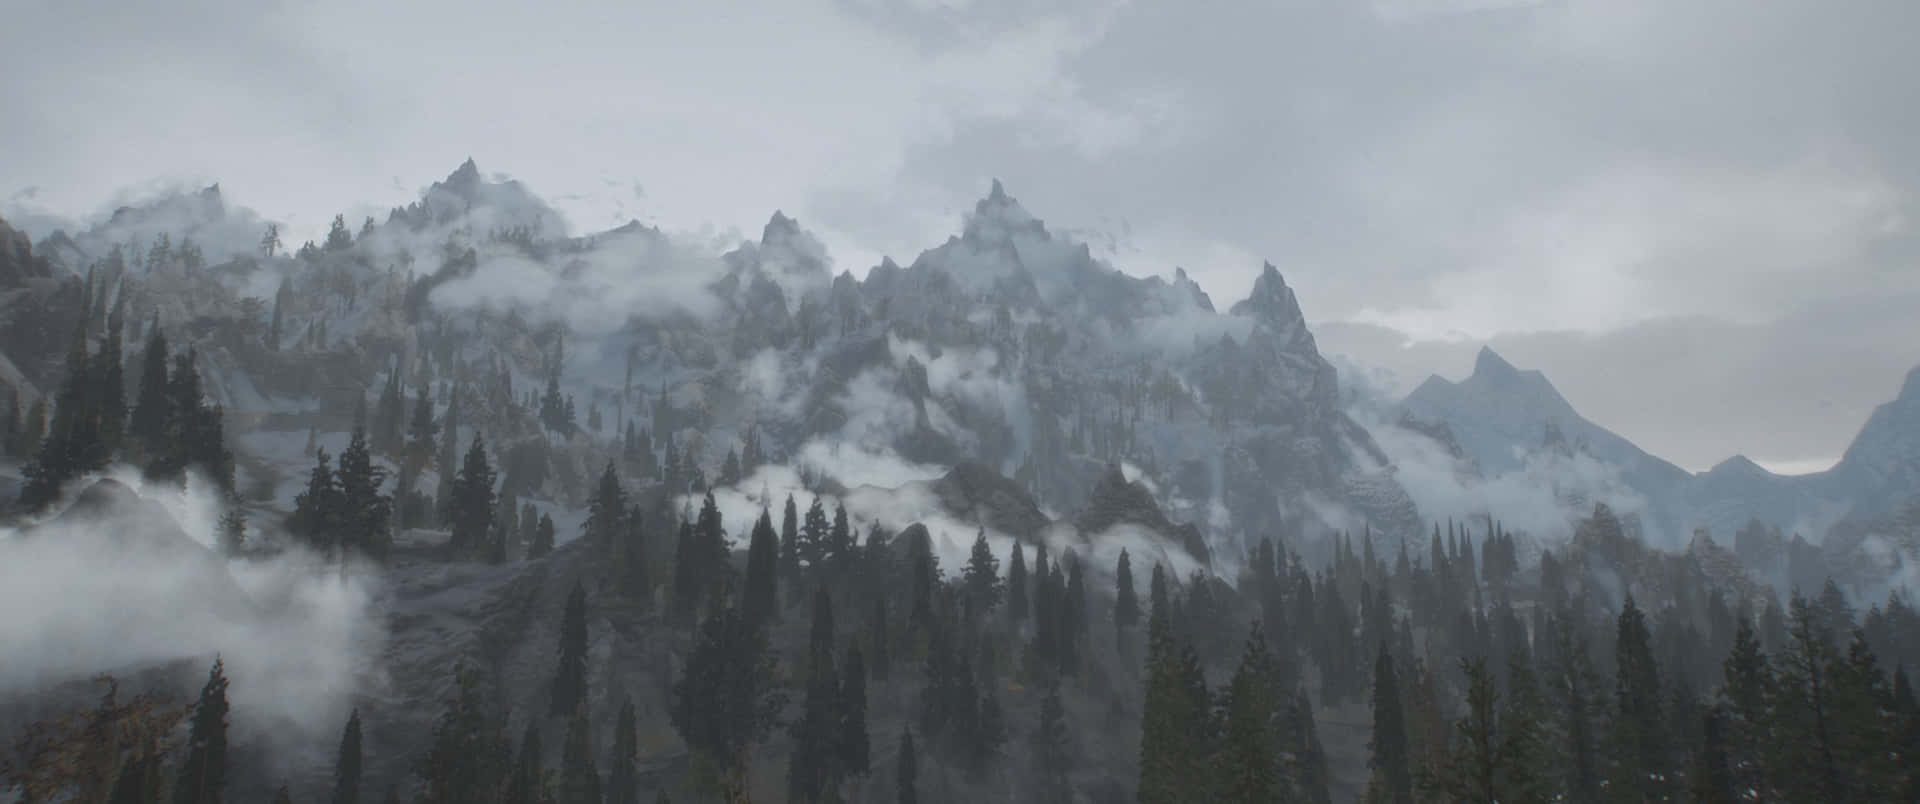 Revel in the beauty of Skyrim with this breathtaking 3440x1440p wallpaper.